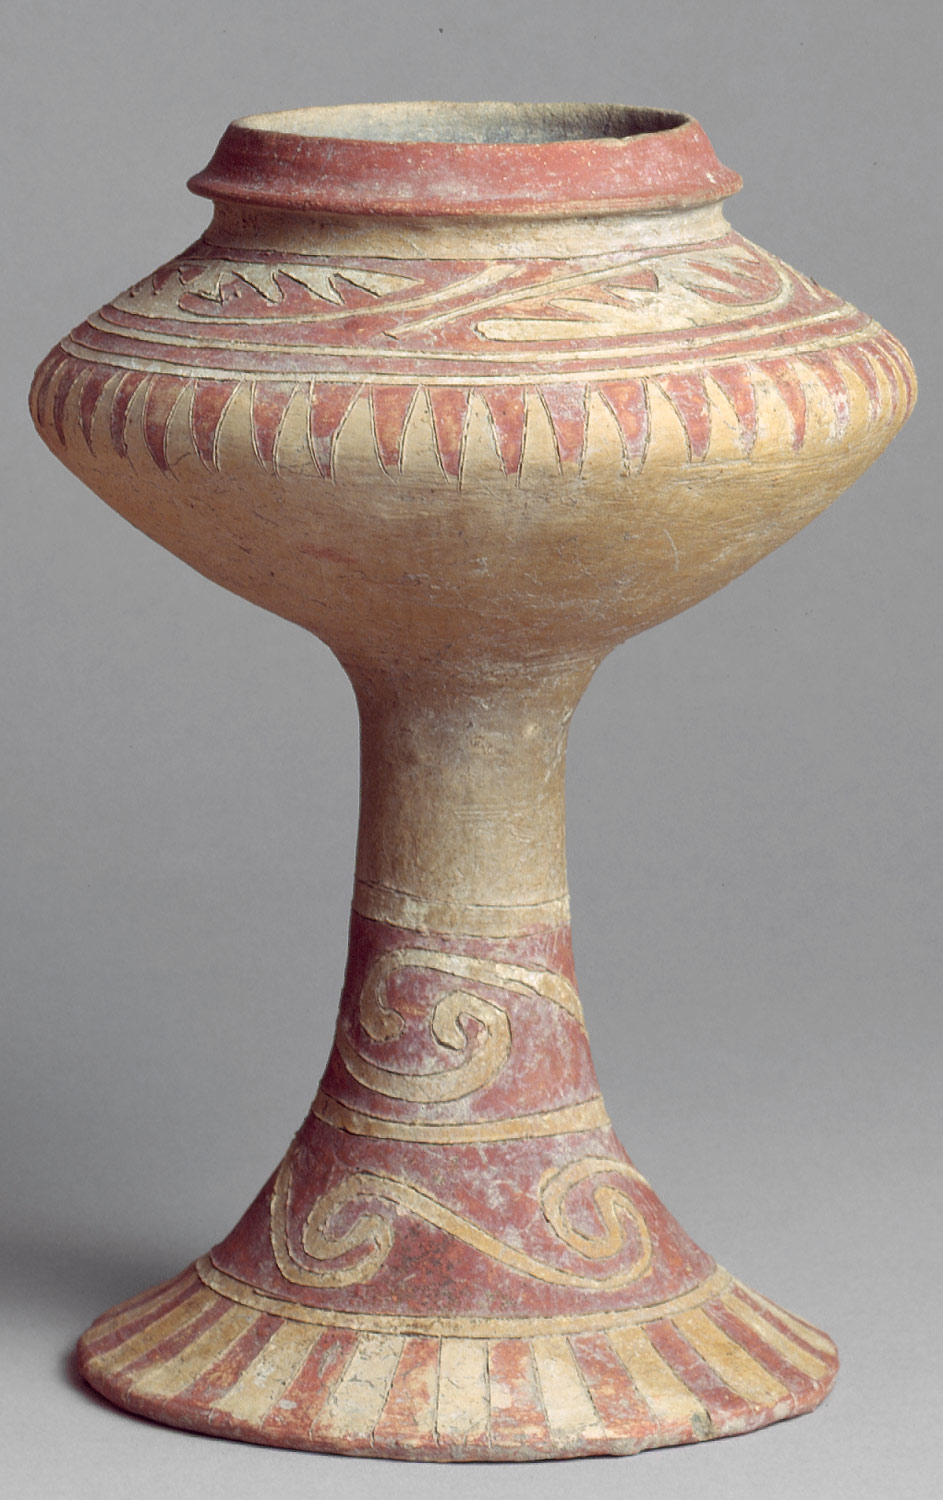 Stem Vase with Incised and Painted Design